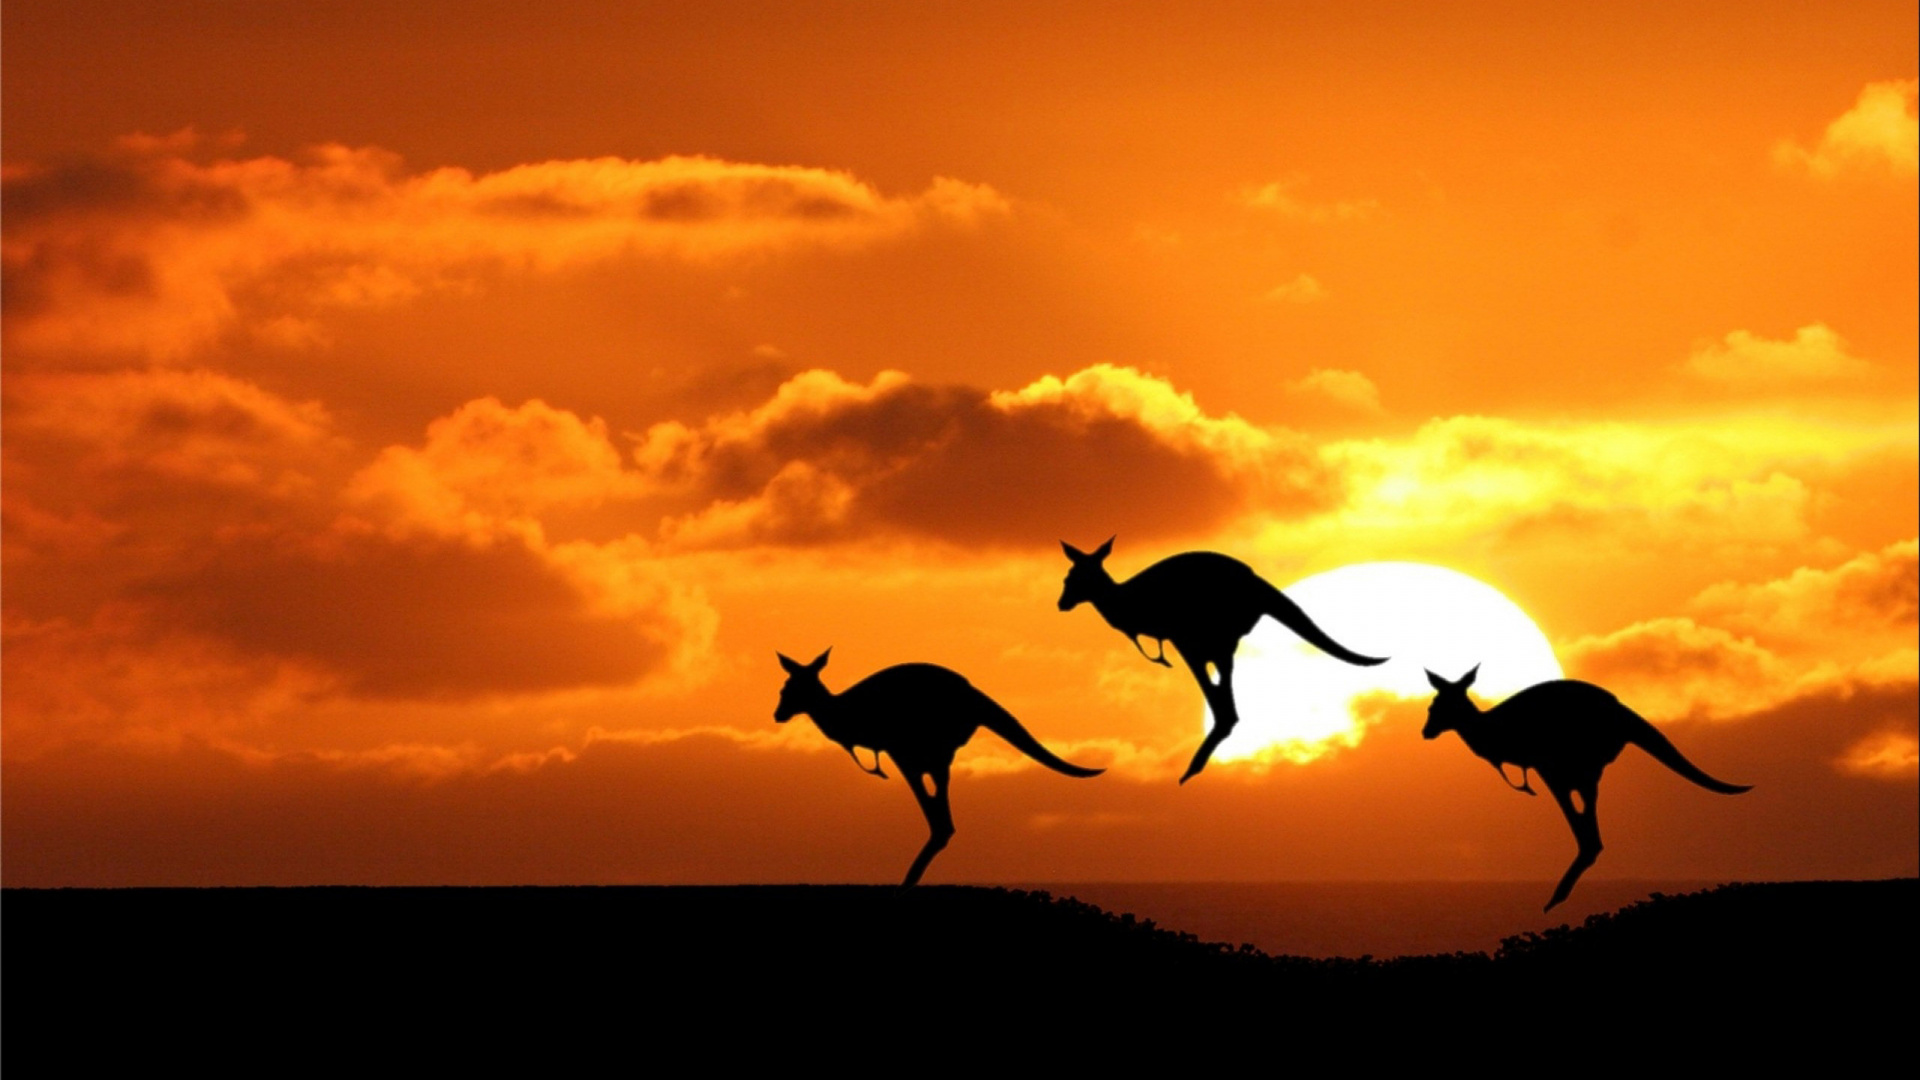 Silhouette of Deer on Grass Field During Sunset. Wallpaper in 1920x1080 Resolution